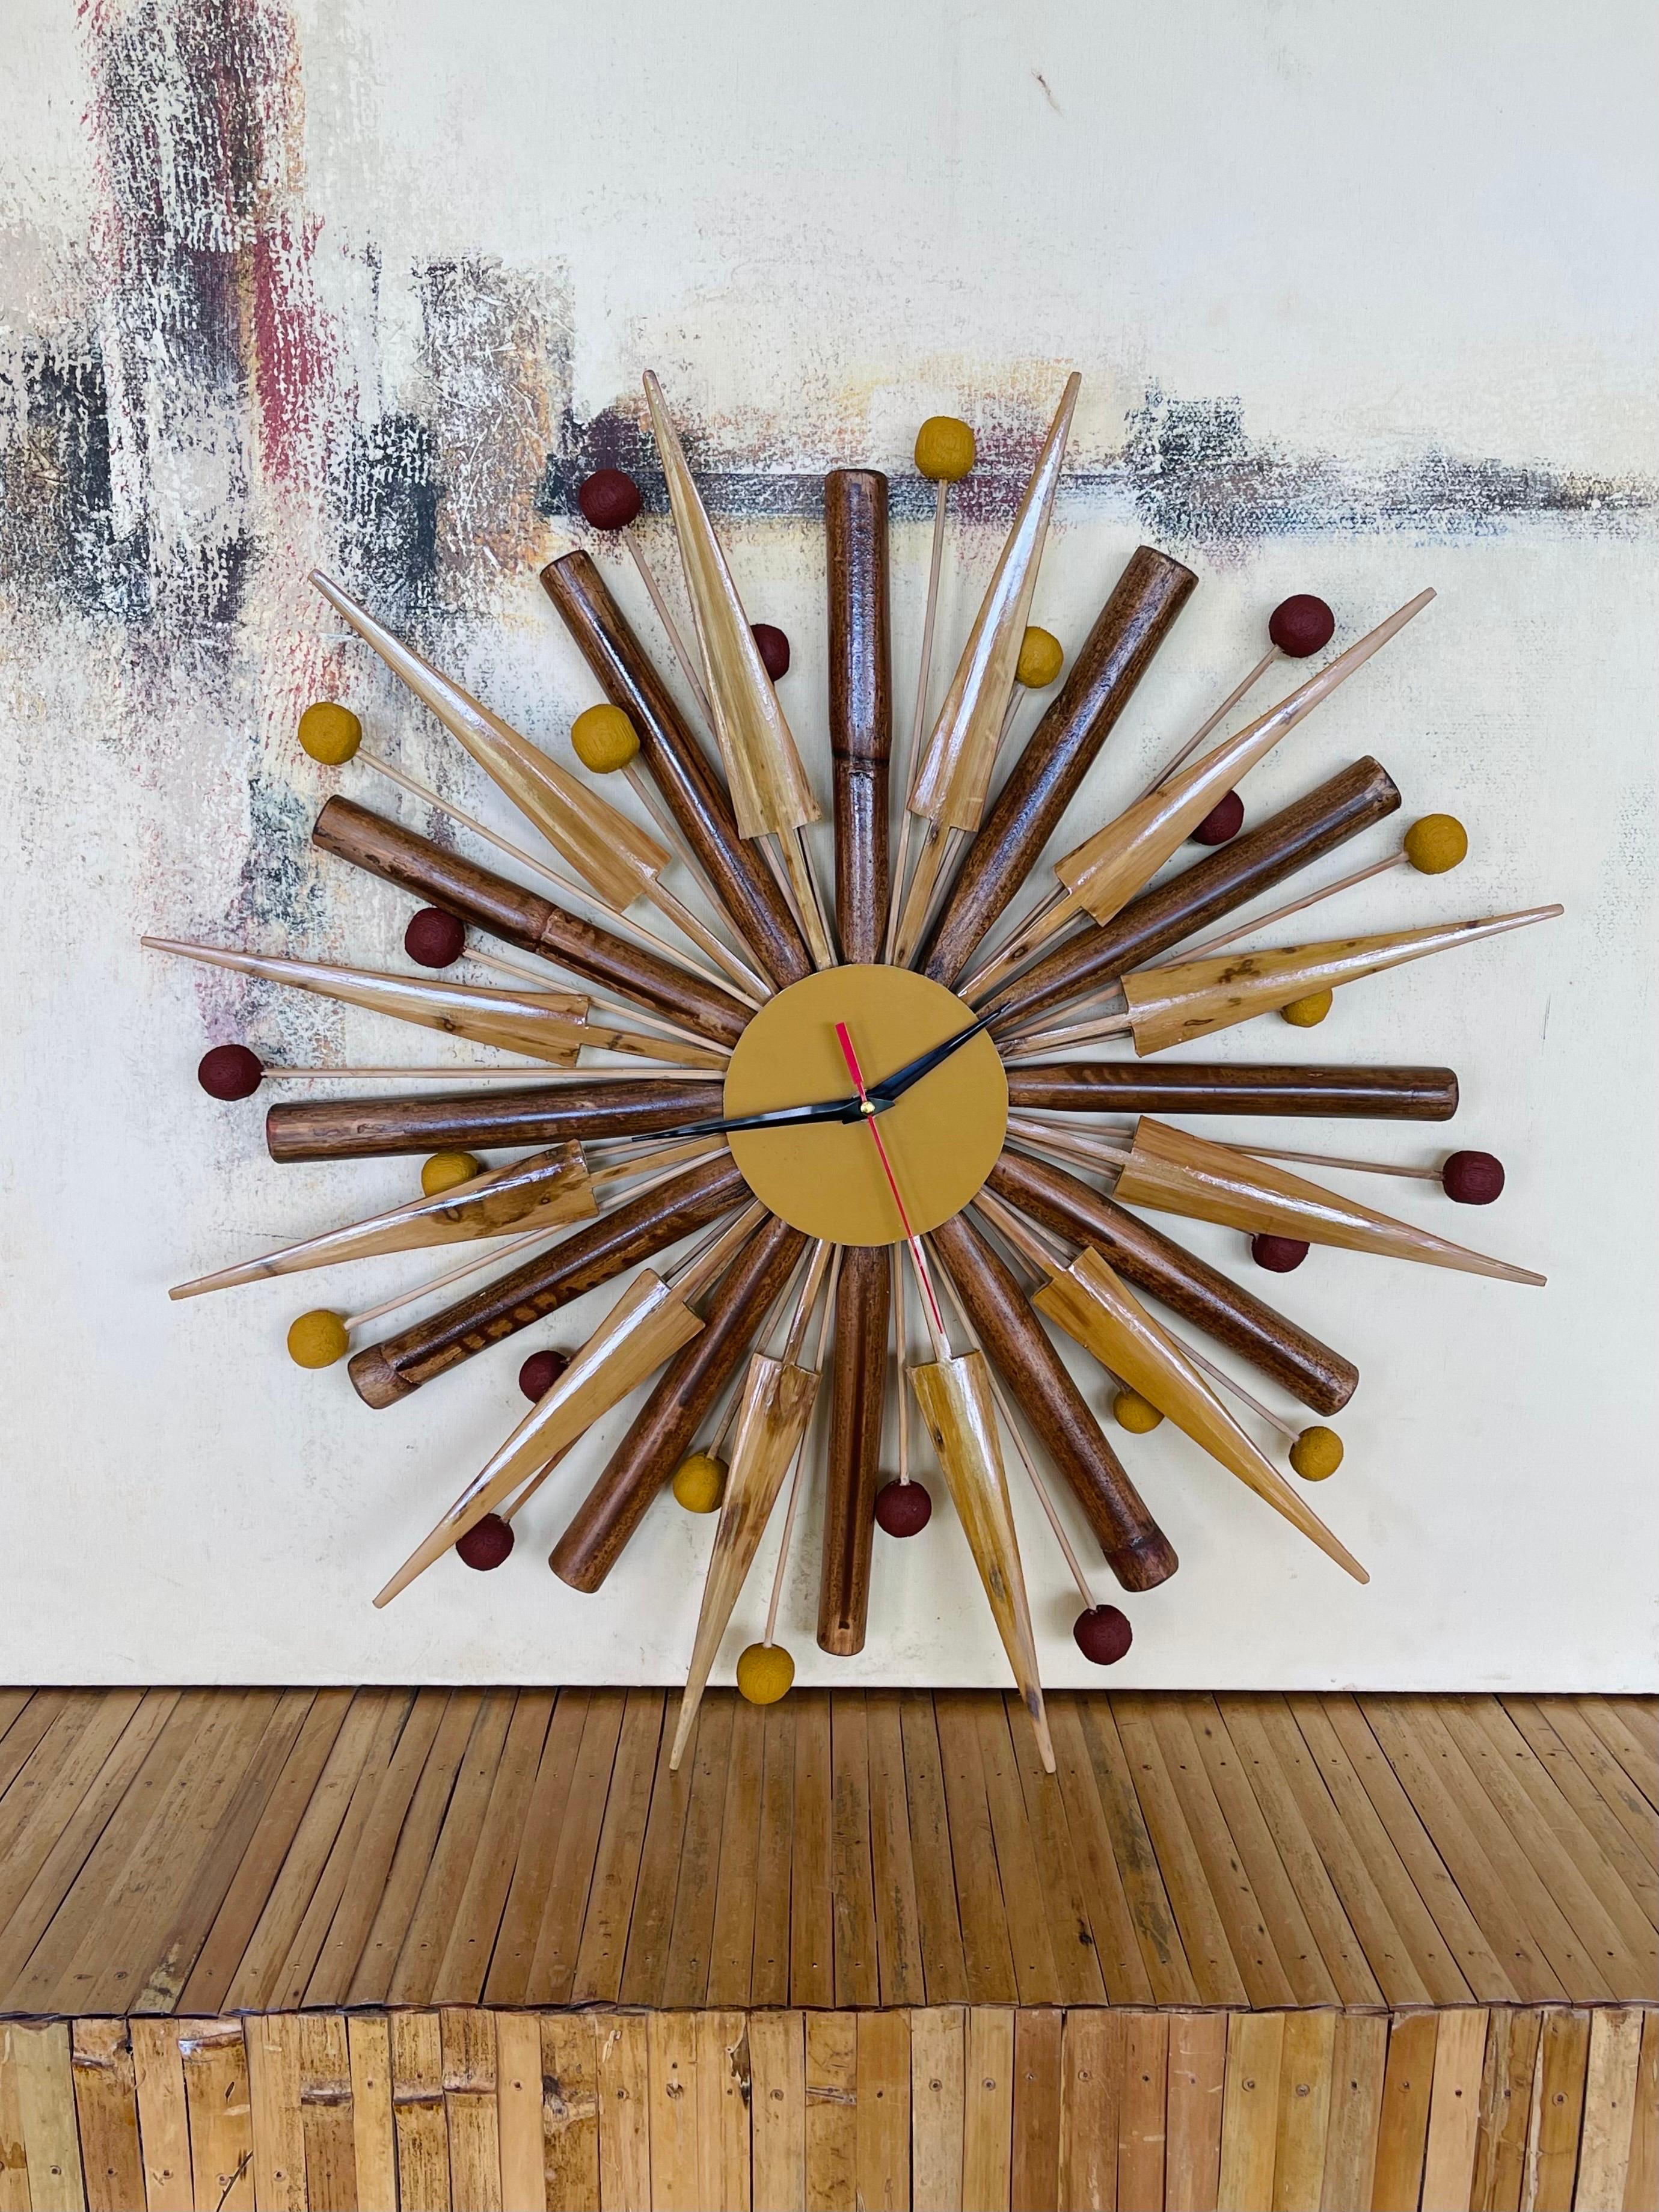 This is a High-quality Natural Rattan and Bamboo Mid Century style Starburst Clock Hand crafted by the local artisans in the Philippines


The clock measures 40cm in diameter

Natural Rattan poles stained with teak wood

Organic Bamboo with lacquer